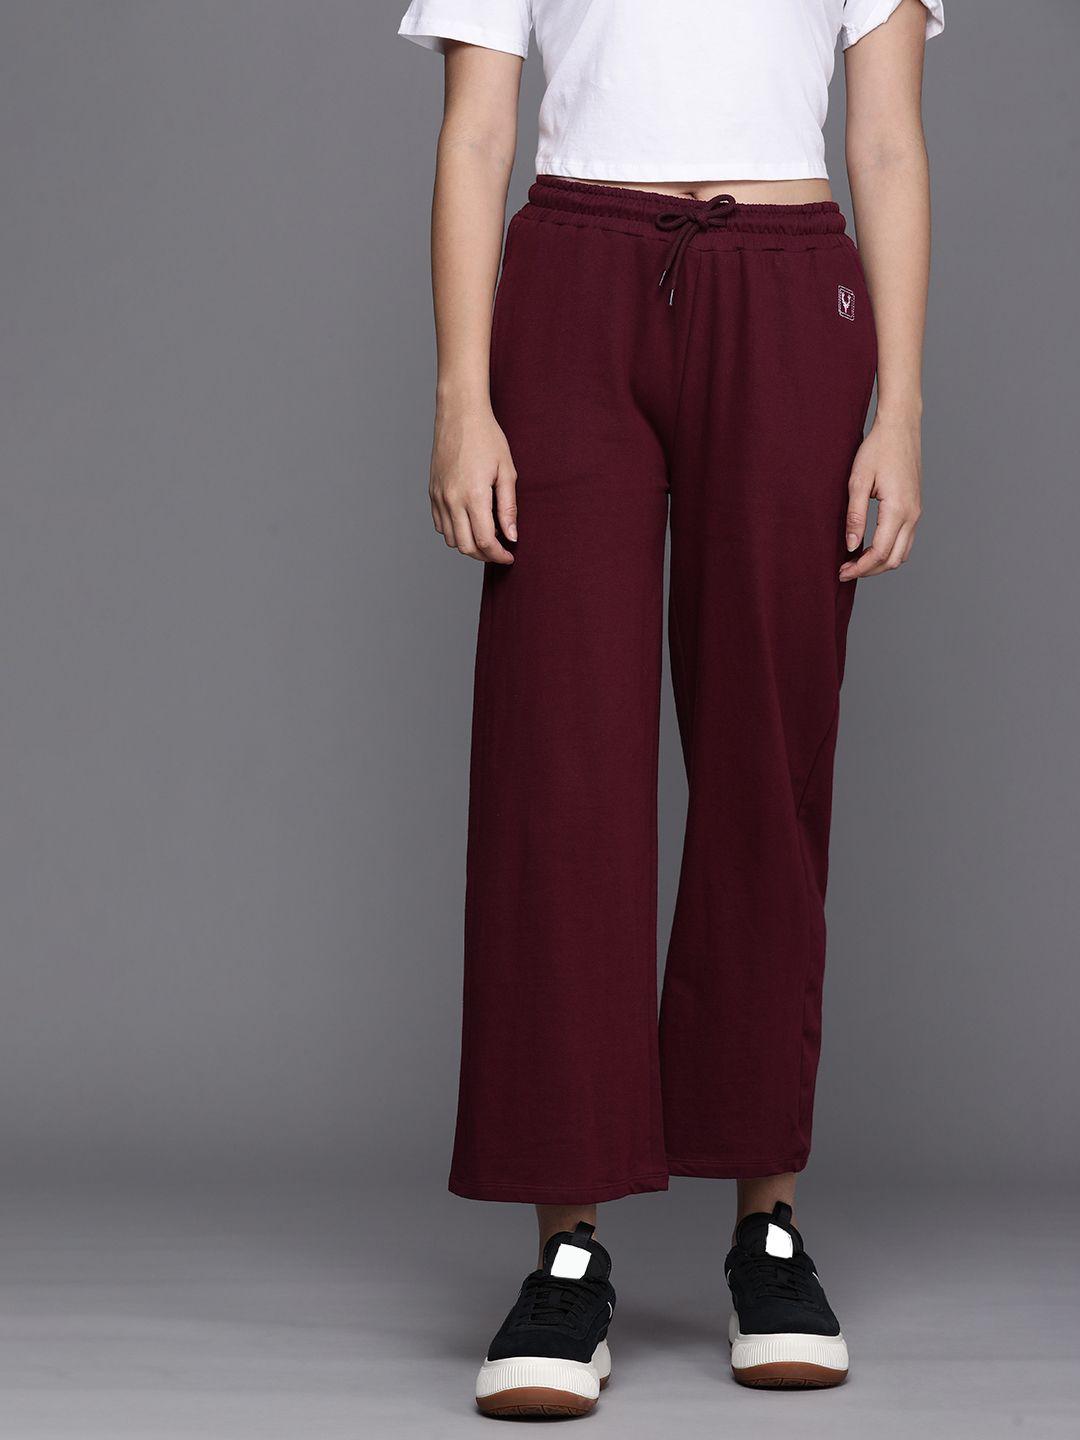 allen-solly-woman-women-maroon-flared-high-rise-culottes-trousers